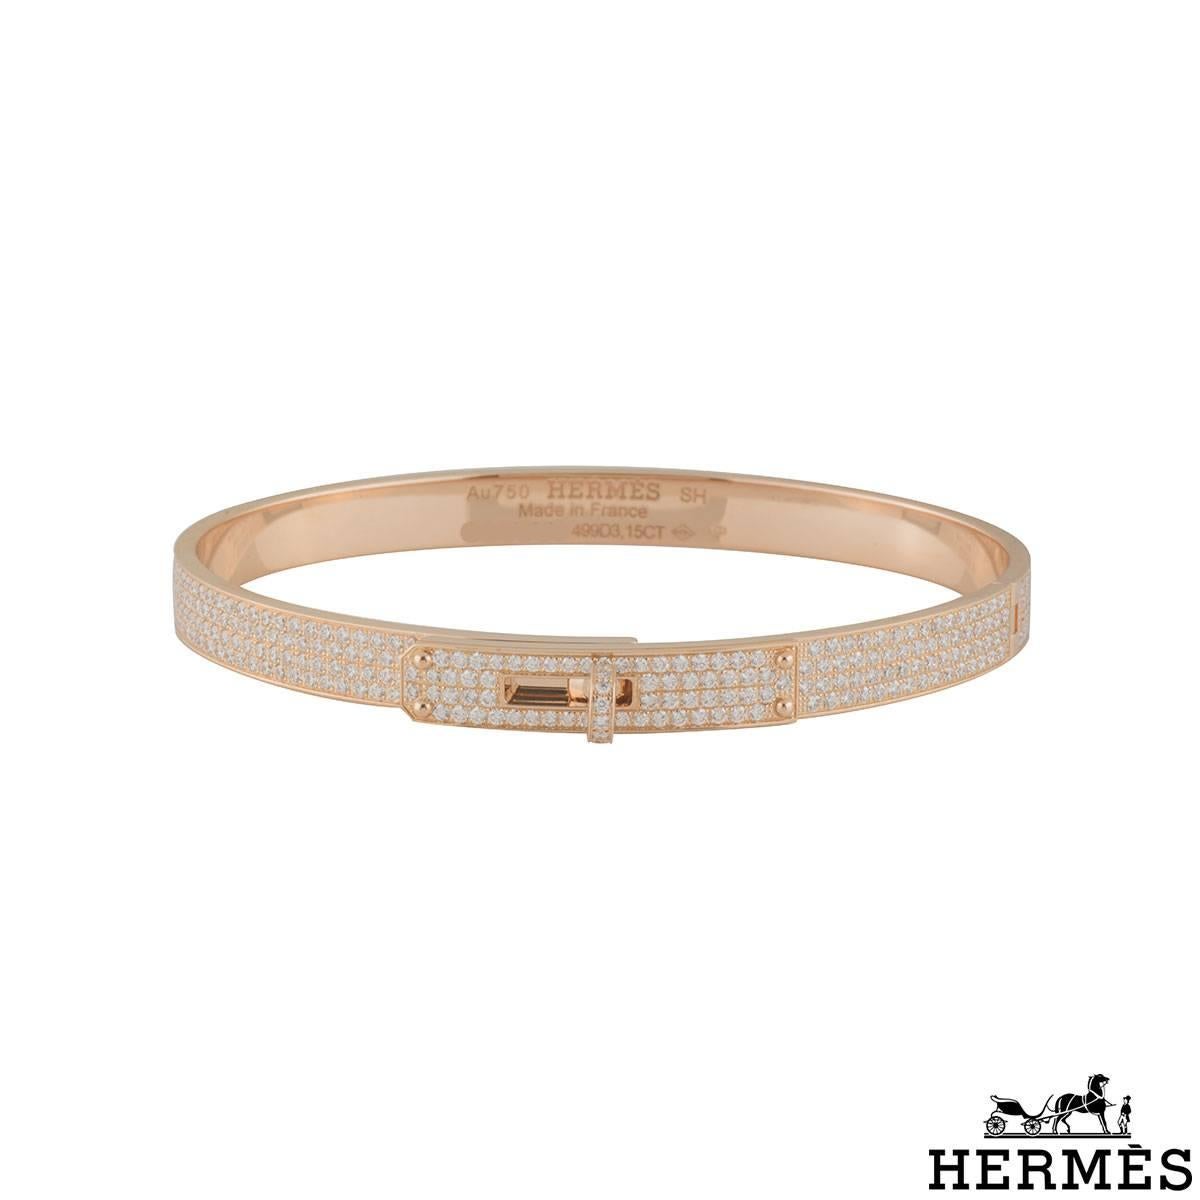 A sparkly 18k rose gold diamond Hermes bangle from the Kelly collection. The 5mm wide bangle comprises of pave set diamonds around the outer edge. There are 499 round brilliant cut diamonds with total weight of 3.15ct, D-F colour and VVS1 clarity.